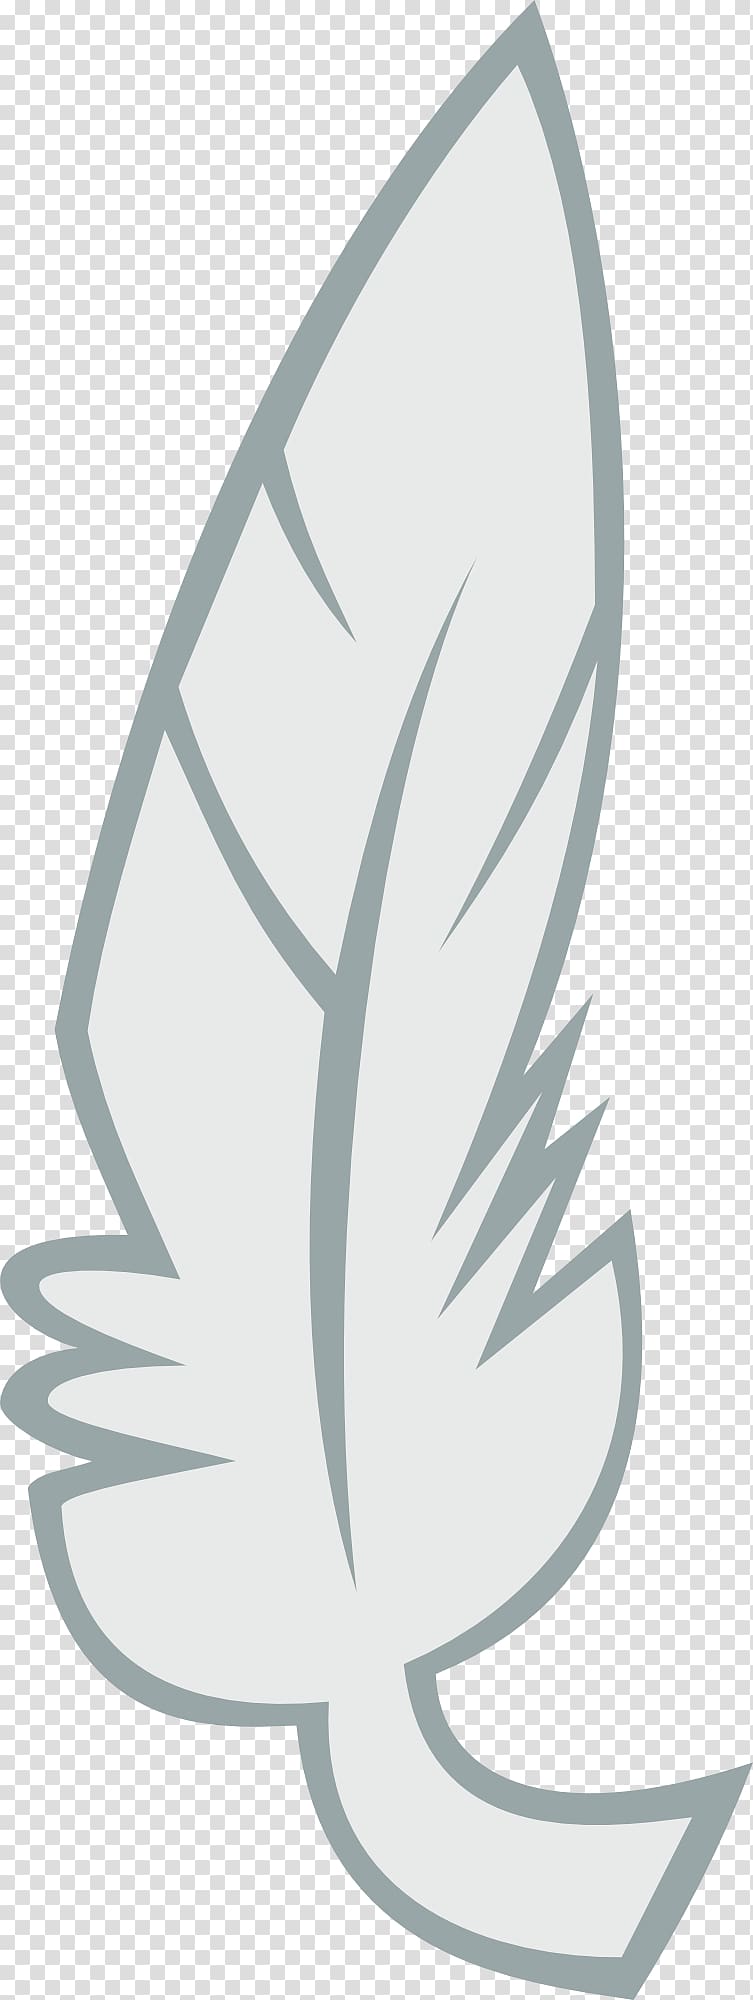 Feather Derpy Hooves Cutie Mark Crusaders Pony Call of the Cutie, silver mark transparent background PNG clipart